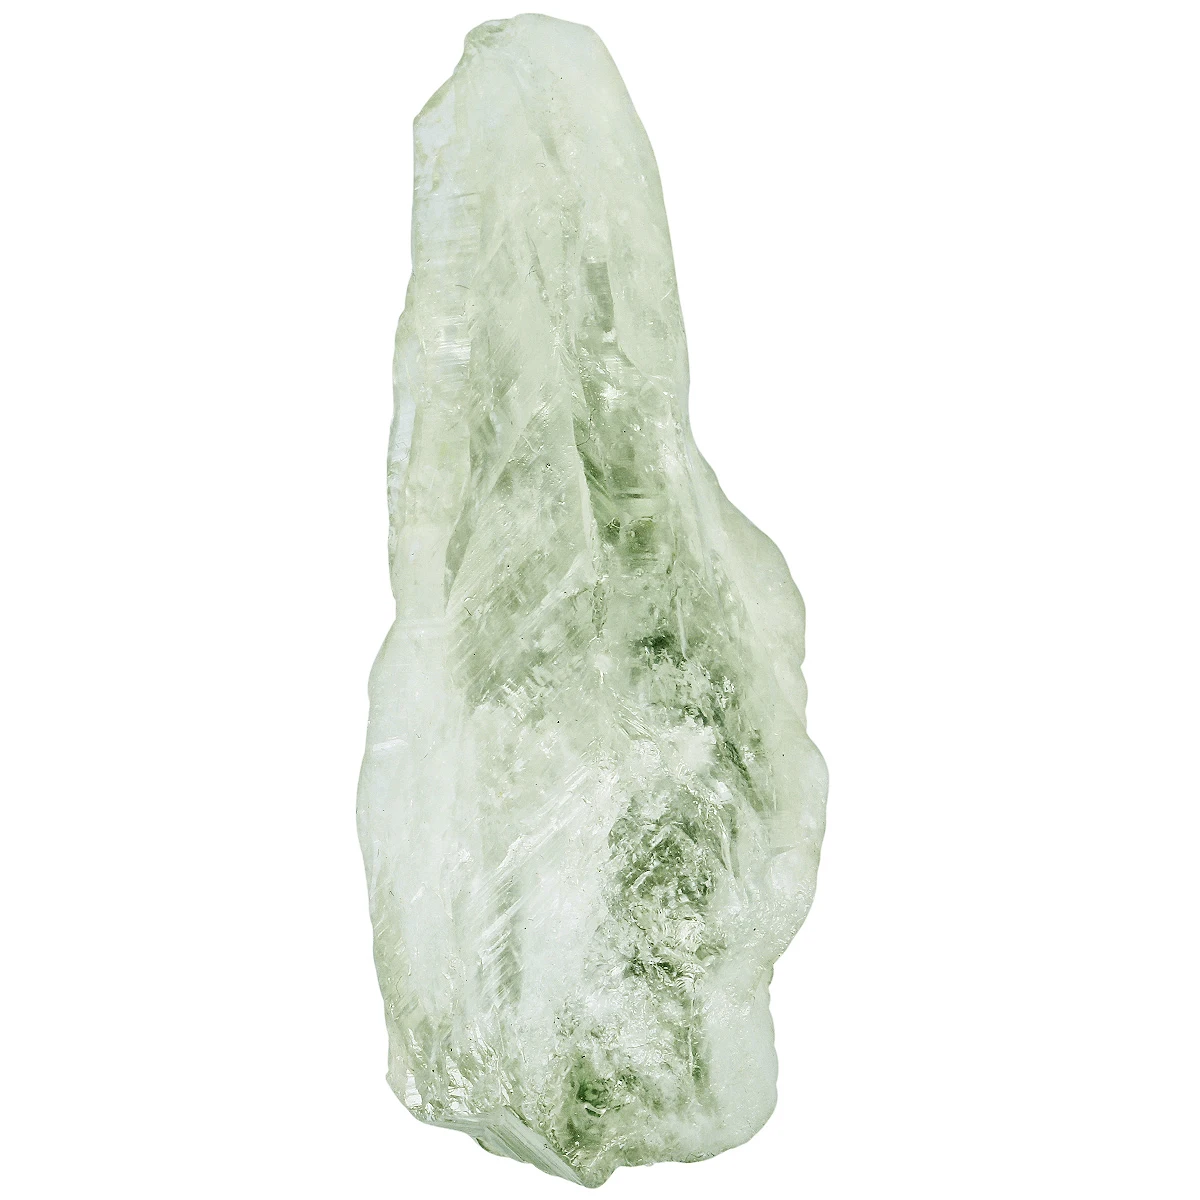 1Pc Irregular Green Crystal Quartz Point Wand Healing Rough Stone Minerals Specimen For Home Decor DIY Jewelry Accessories